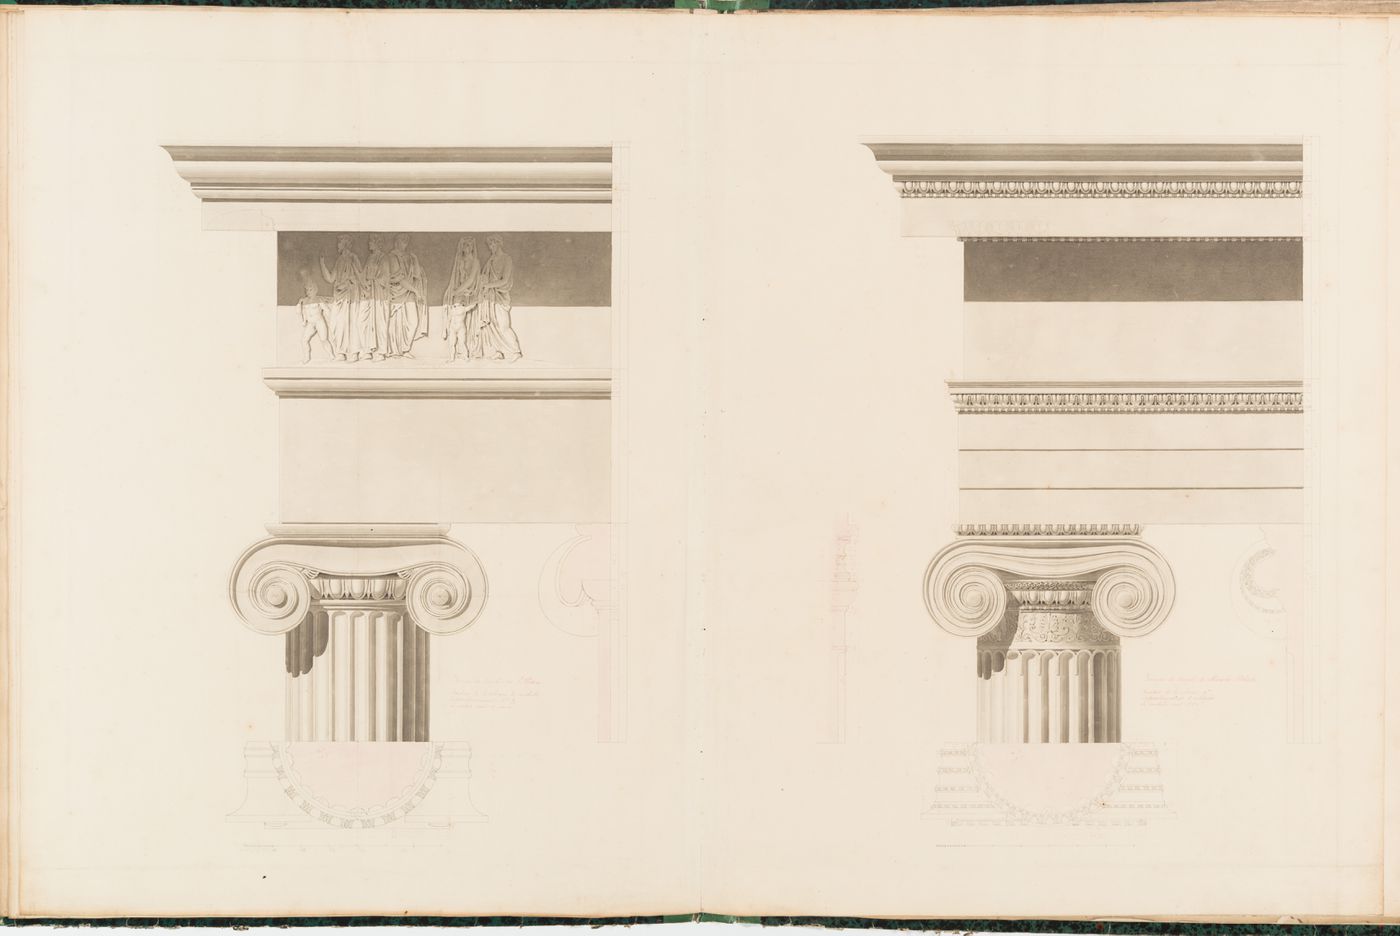 Elevations of shafts, capitals, and entablatures from two Ionic temples with plan and section details of the shafts and capitals: Temple on the Illisuss and the Temple of Athena Nike, Athens